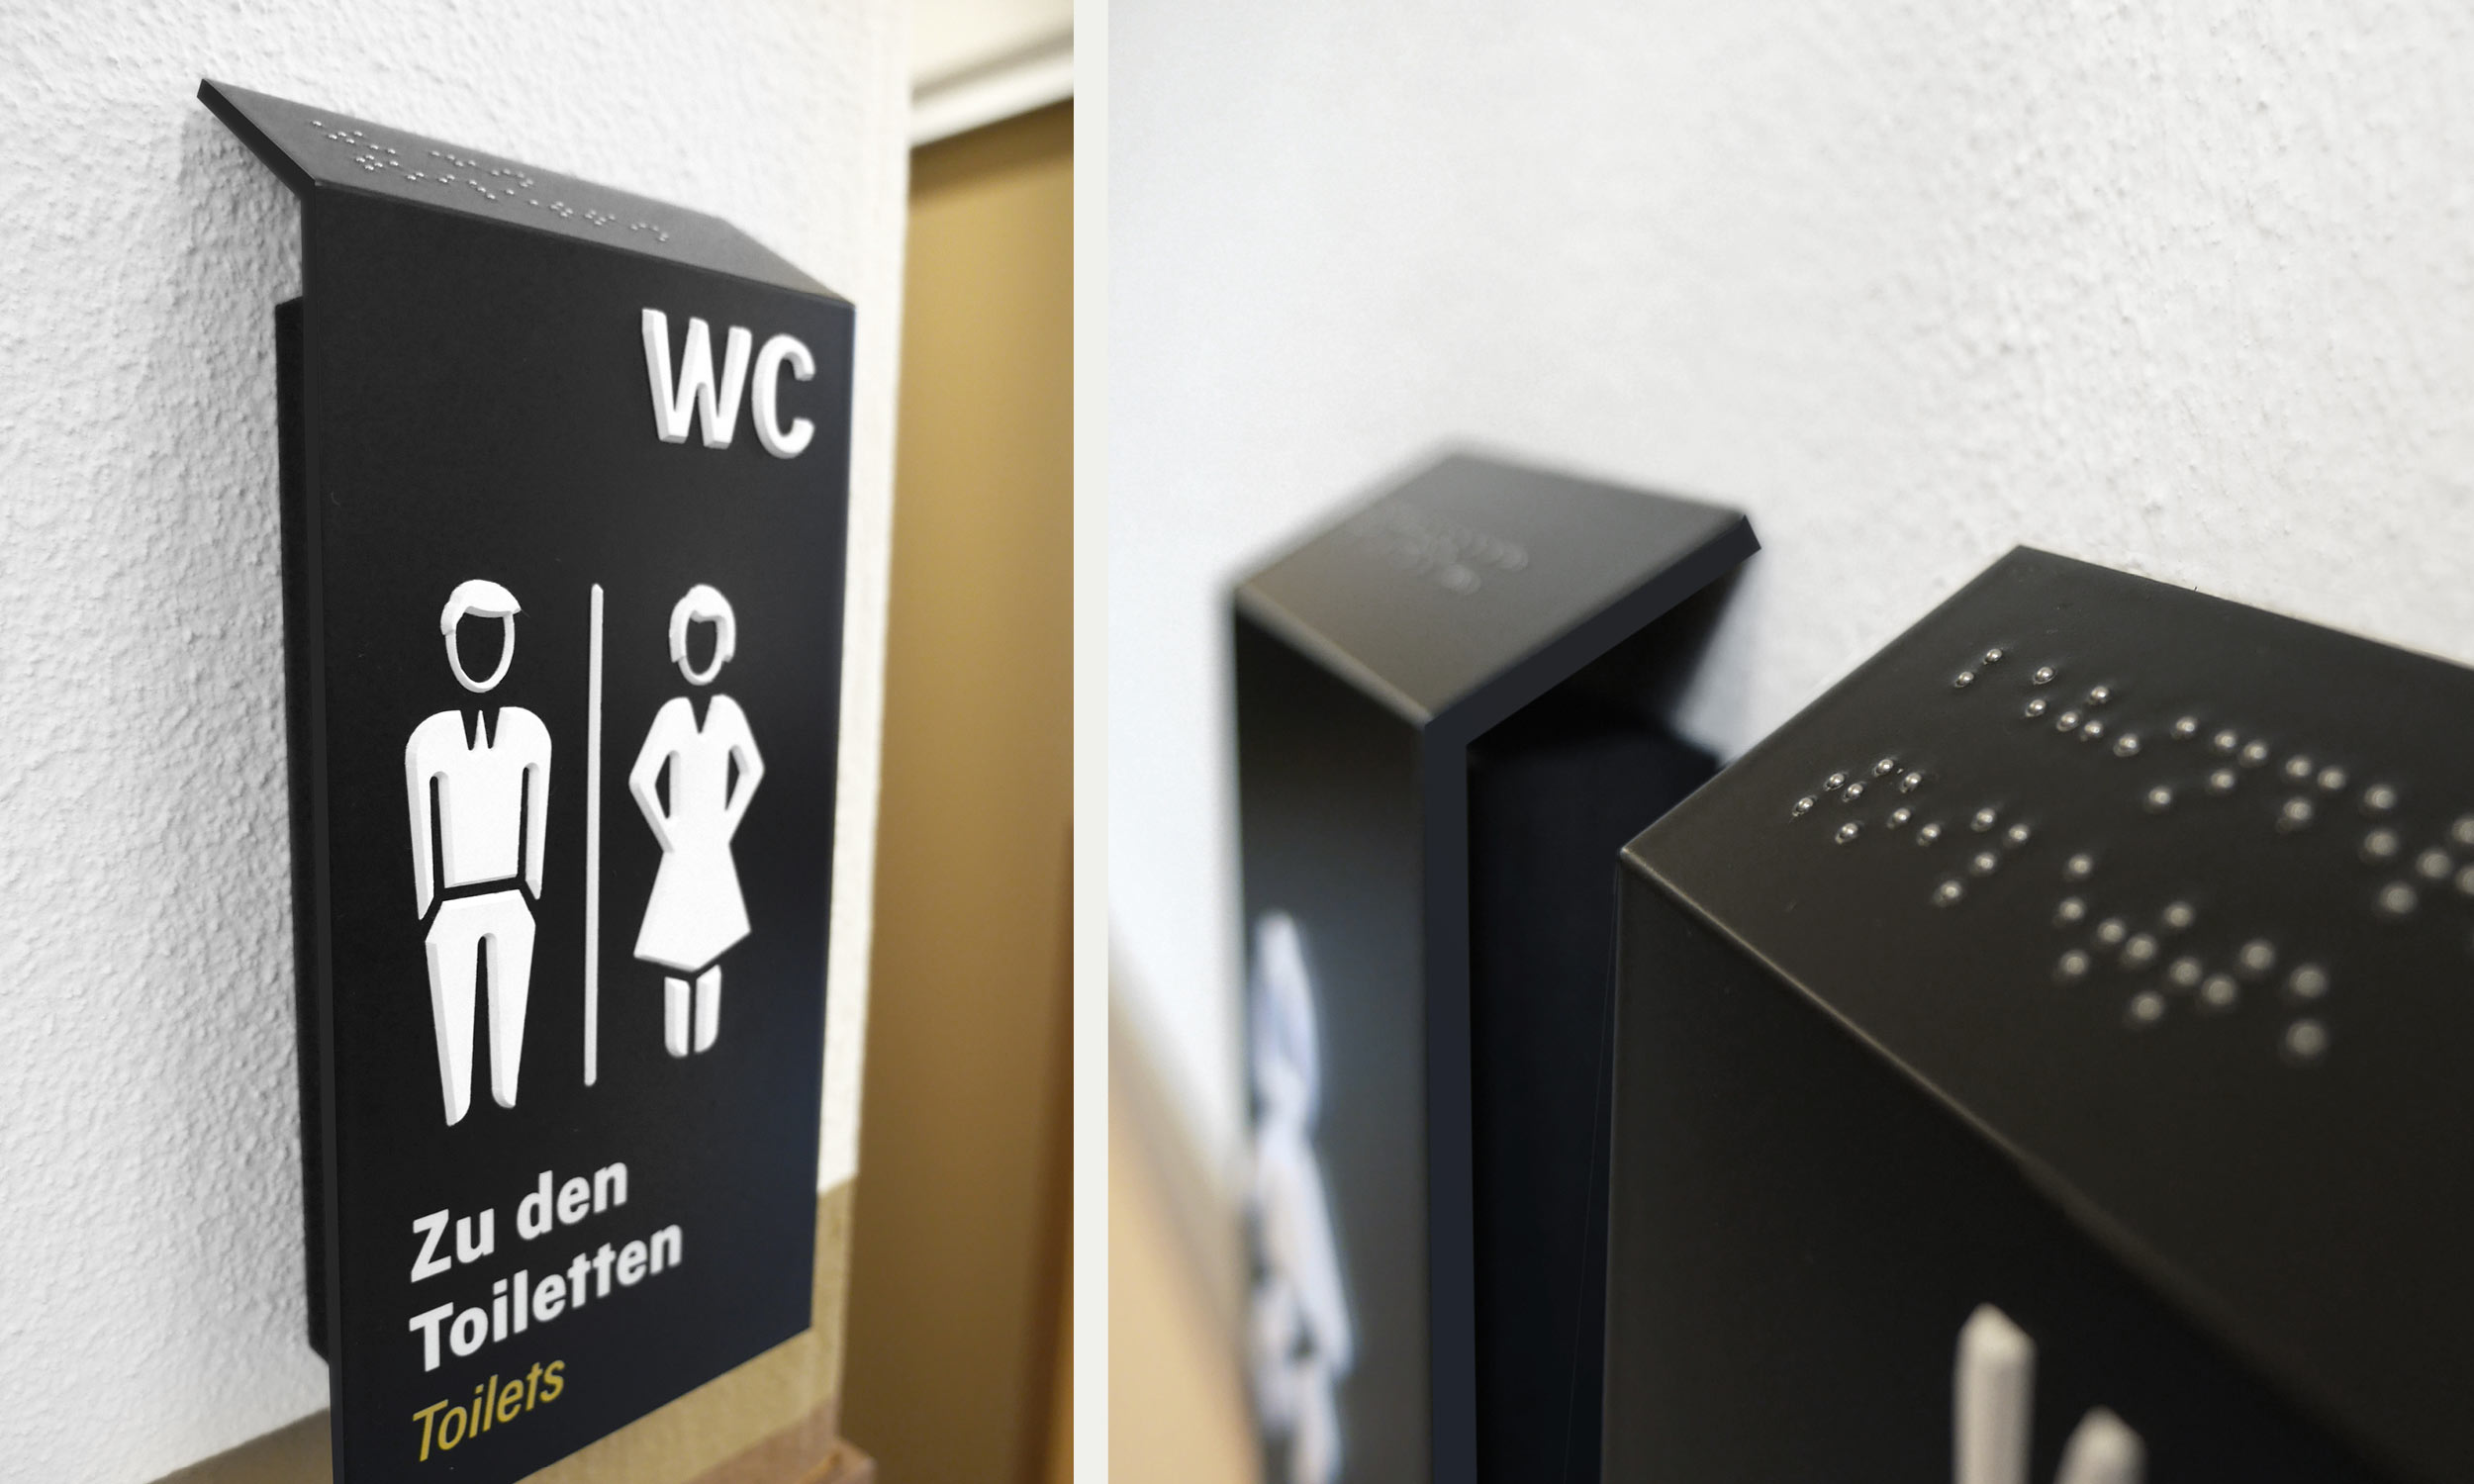 Photos of the toilet signage with tactile pictograms and separate marking in Braille